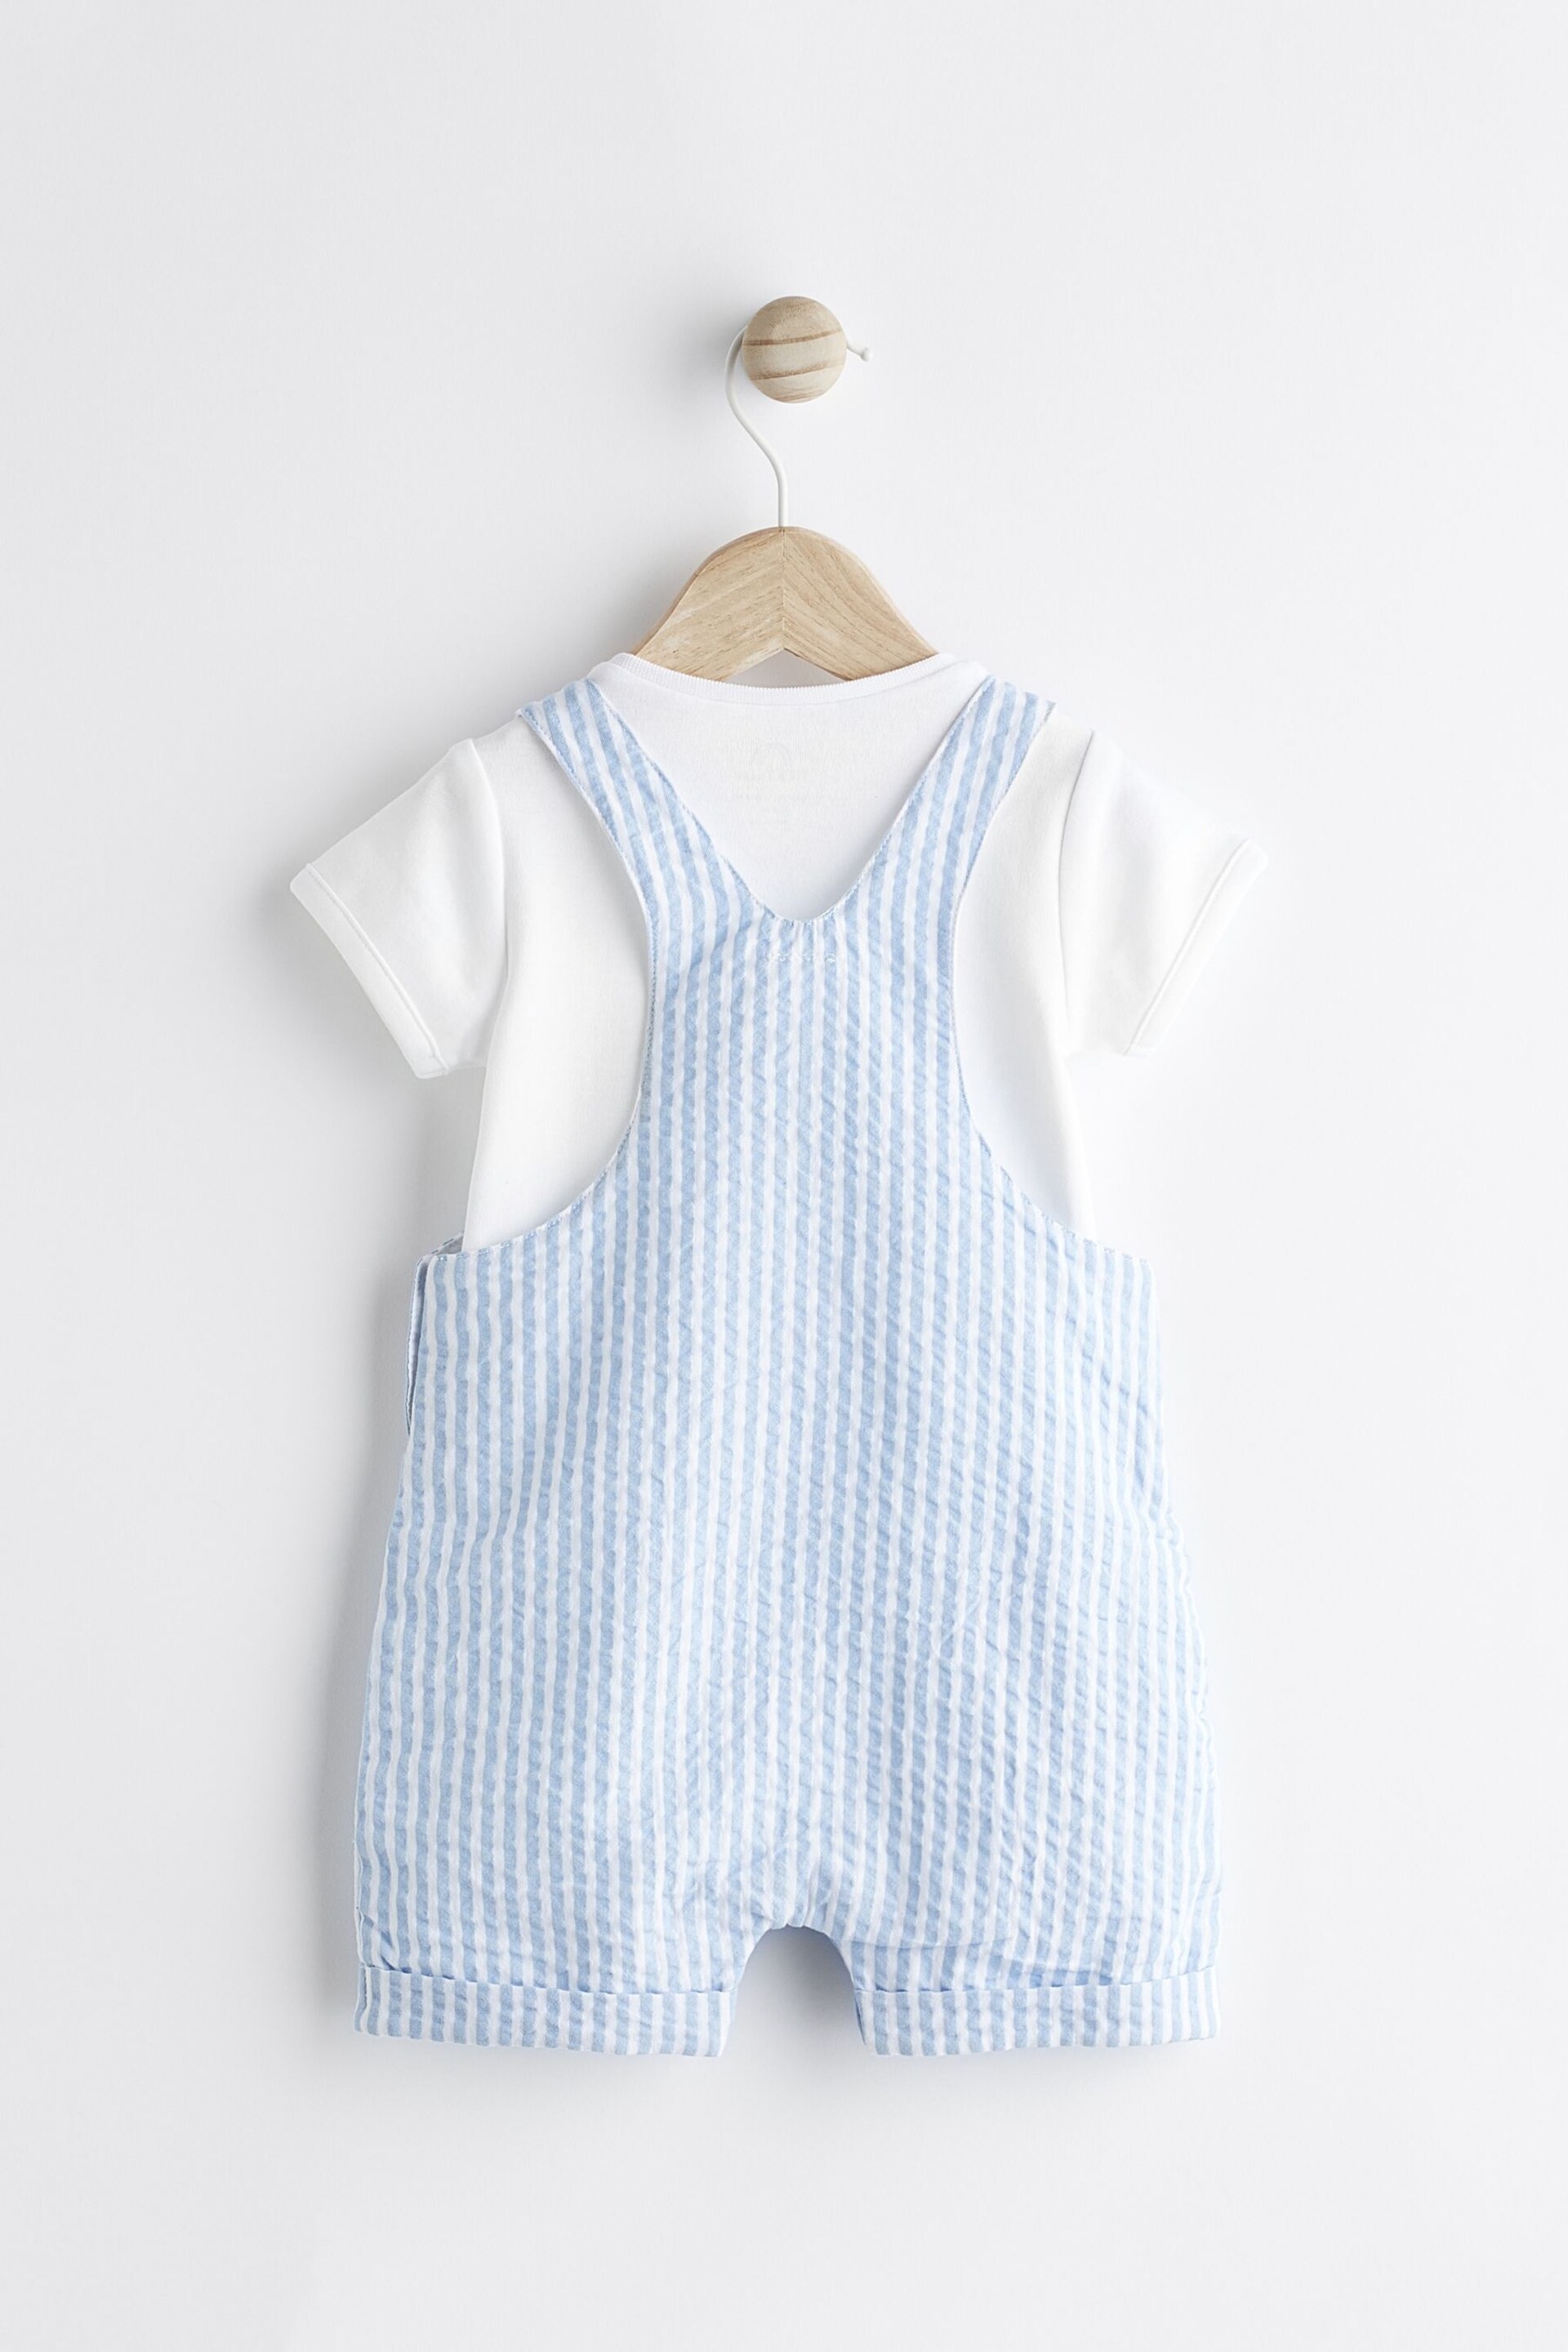 Blue/White Stripe Baby Woven Dungarees and Bodysuit Set (0mths-2yrs) - Image 2 of 7